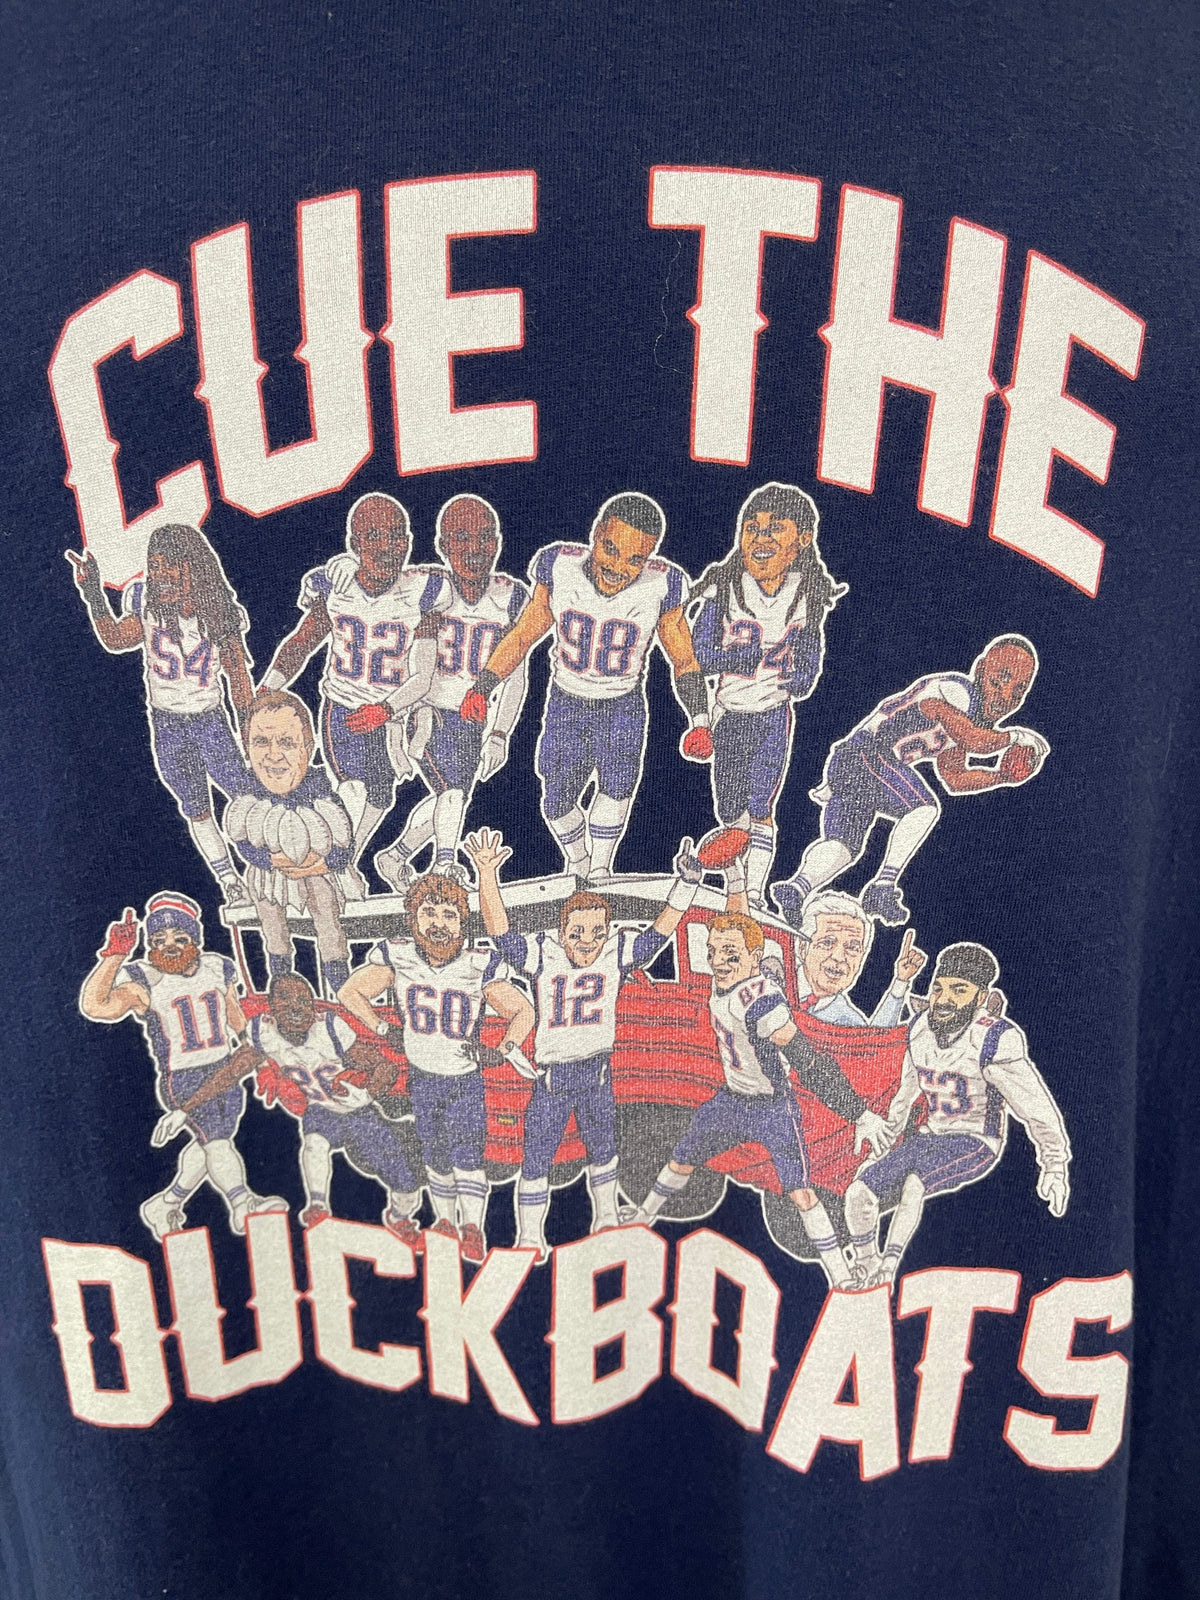 NFL New England Patriots "Cue the Duck Boats" T-Shirt Men's Large